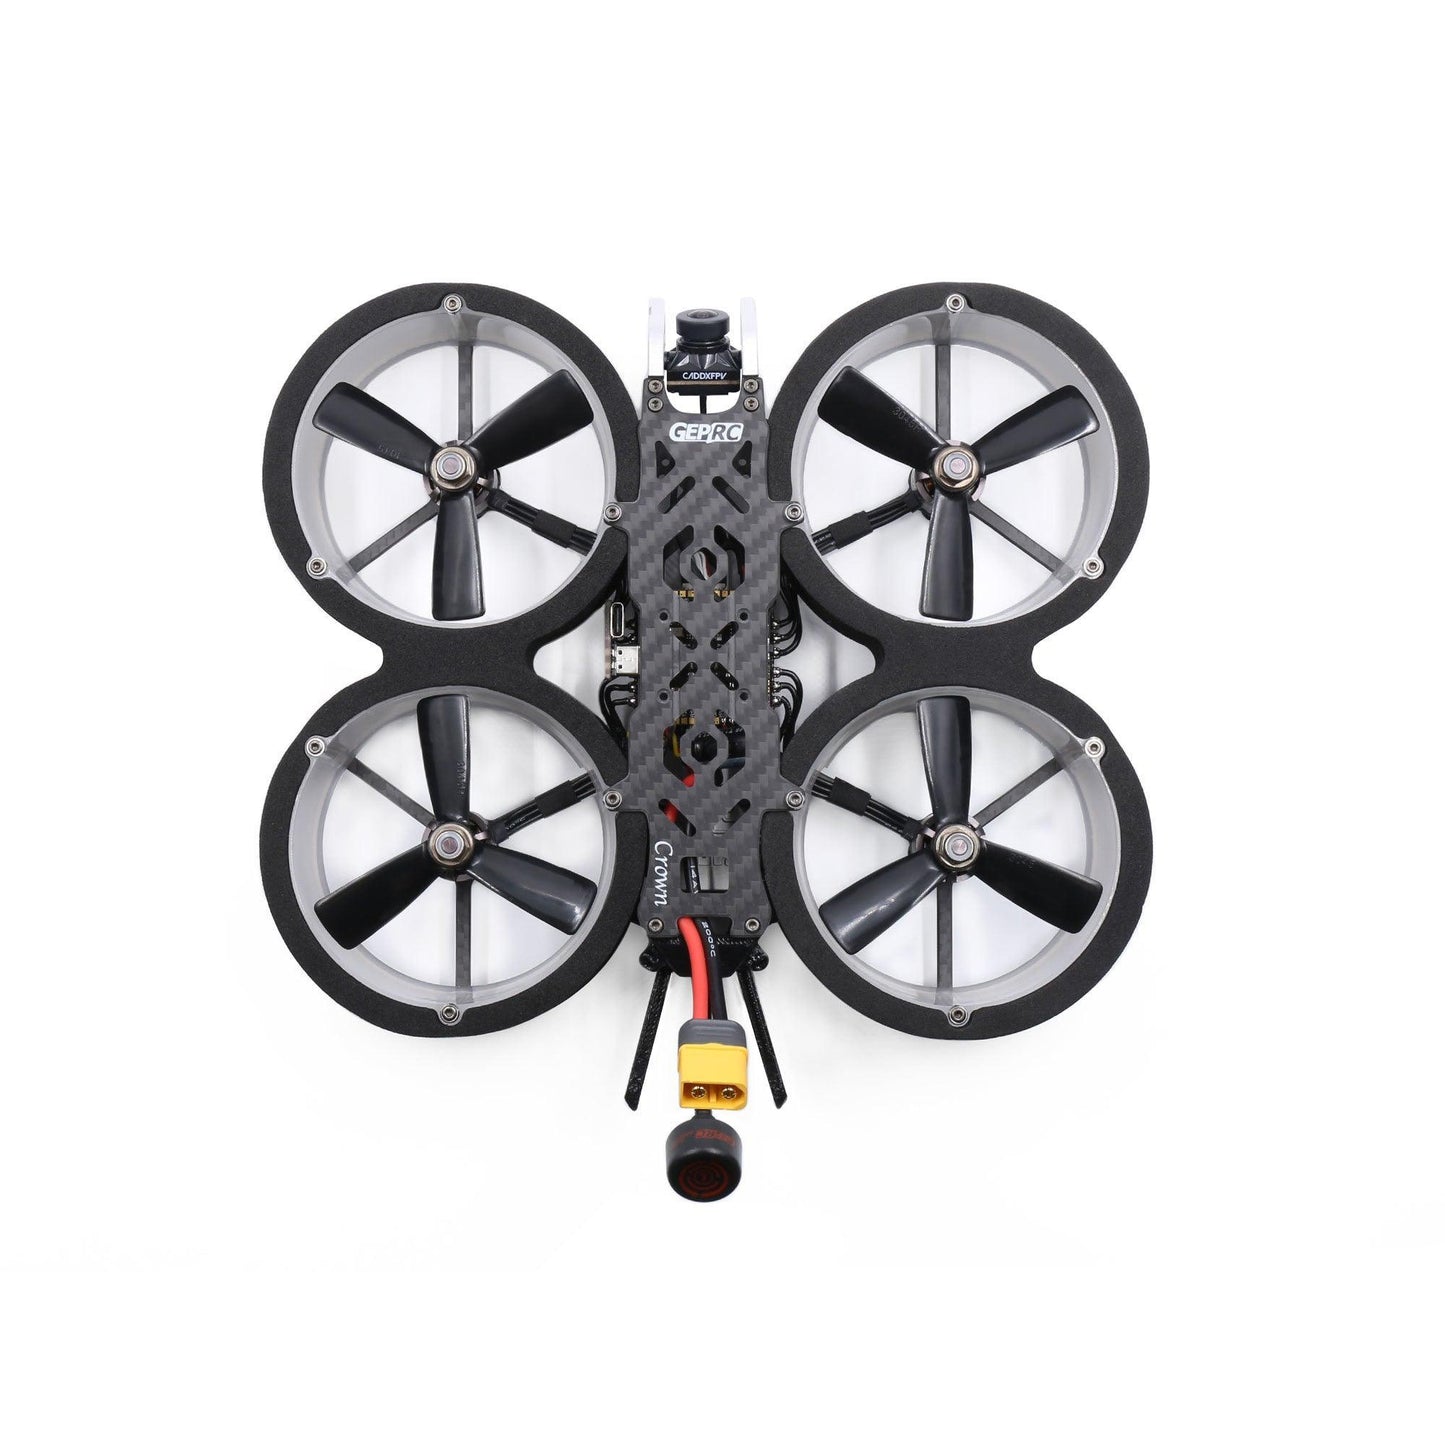 GEPRC Crown HD Cinewhoop FPV Drone - 3inch FPV Carbon Fiber Frame 1408 3500KV (4S) /1408 2500KV (6S) For RC FPV Quadcopter Freestyle Drone